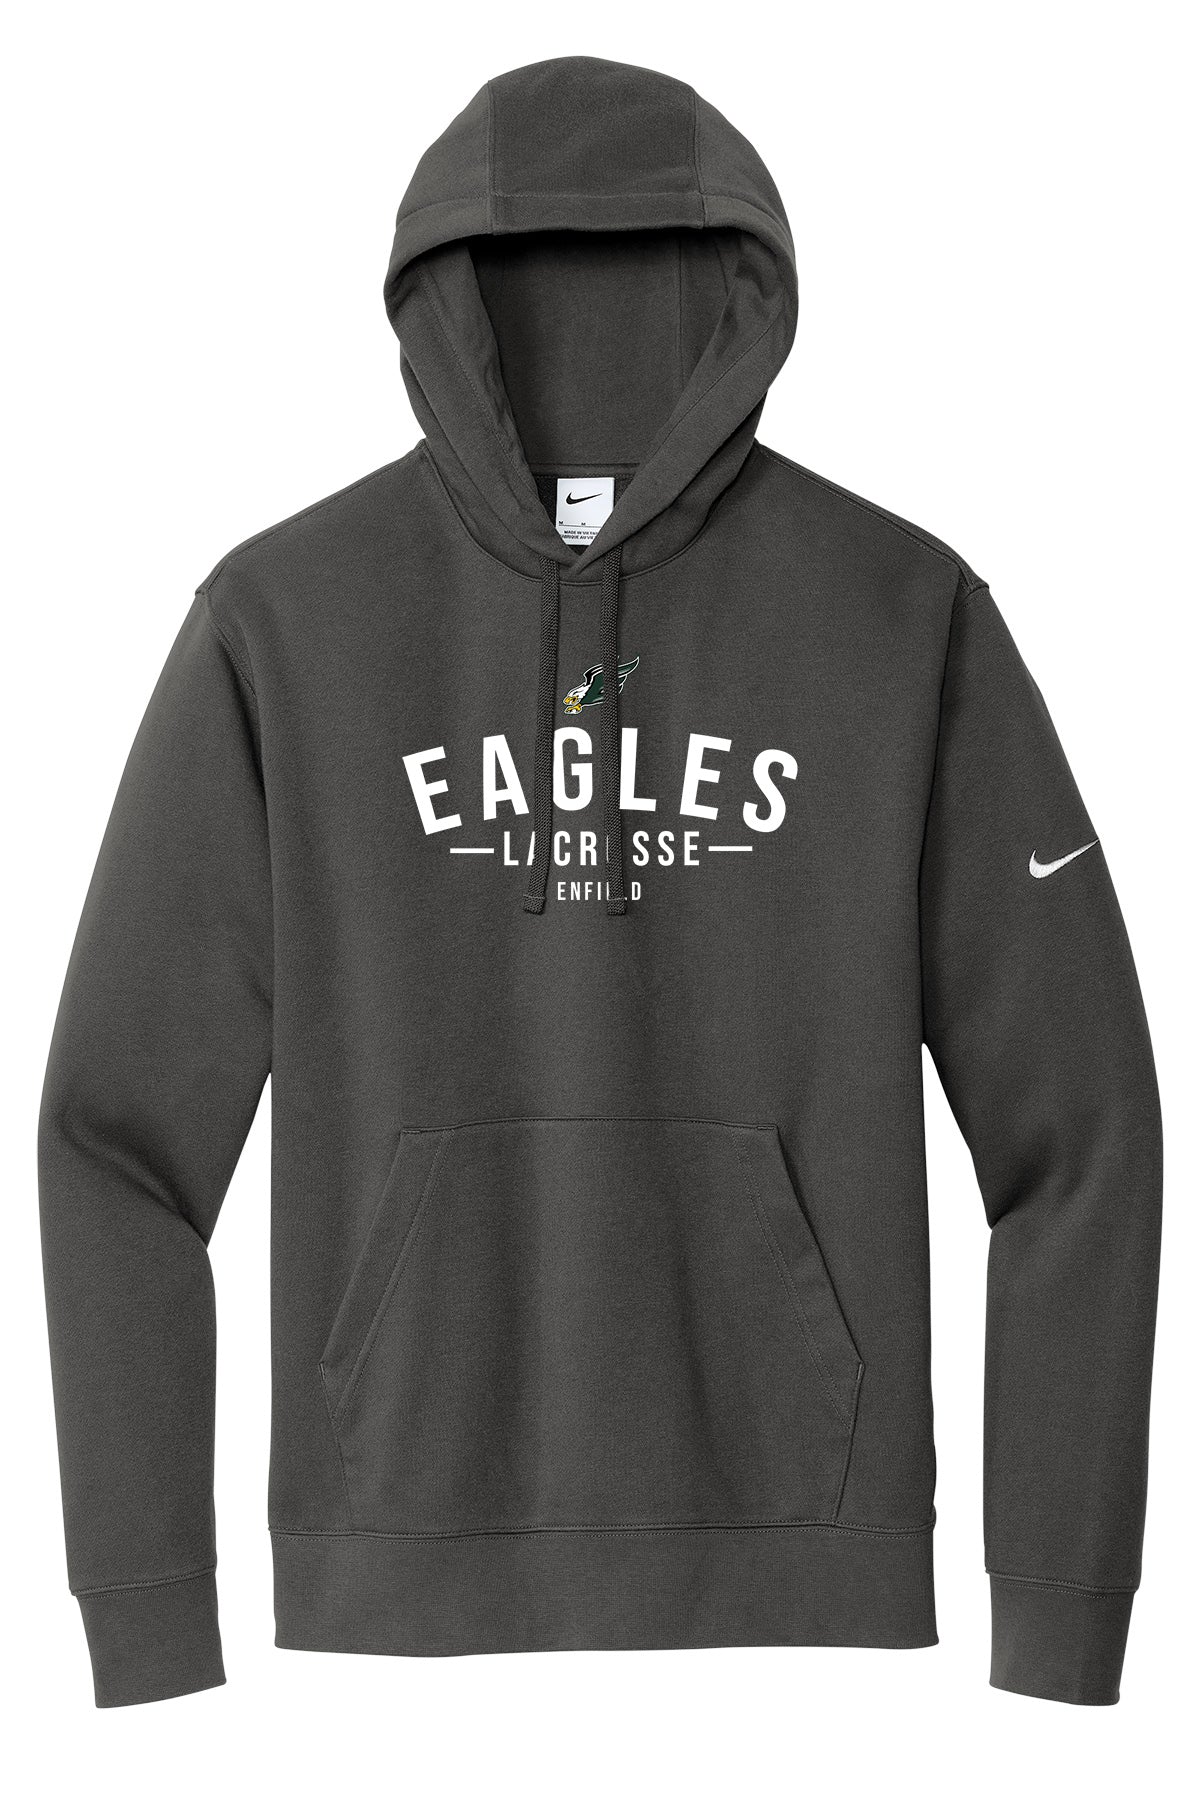 Enfield Lacrosse Adult Nike Fleece Hoodie "Classic" - NKDR1499 (color options available)